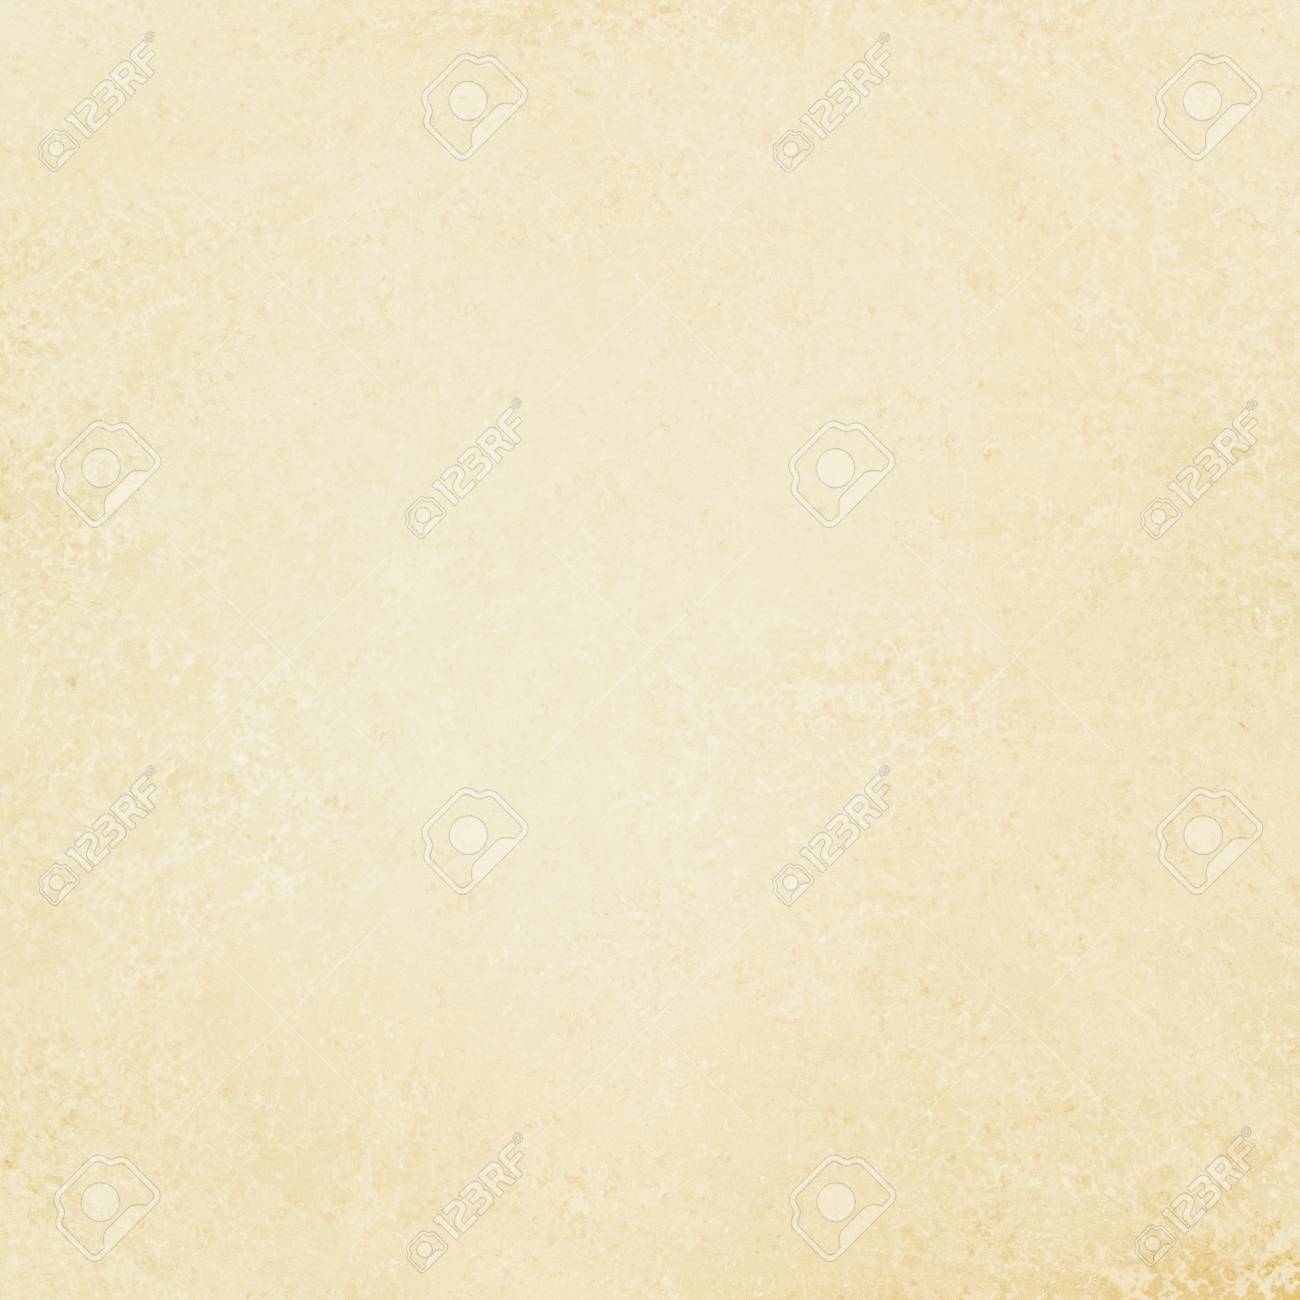 Off White Background Texture Old Paper Stock Photo Picture And